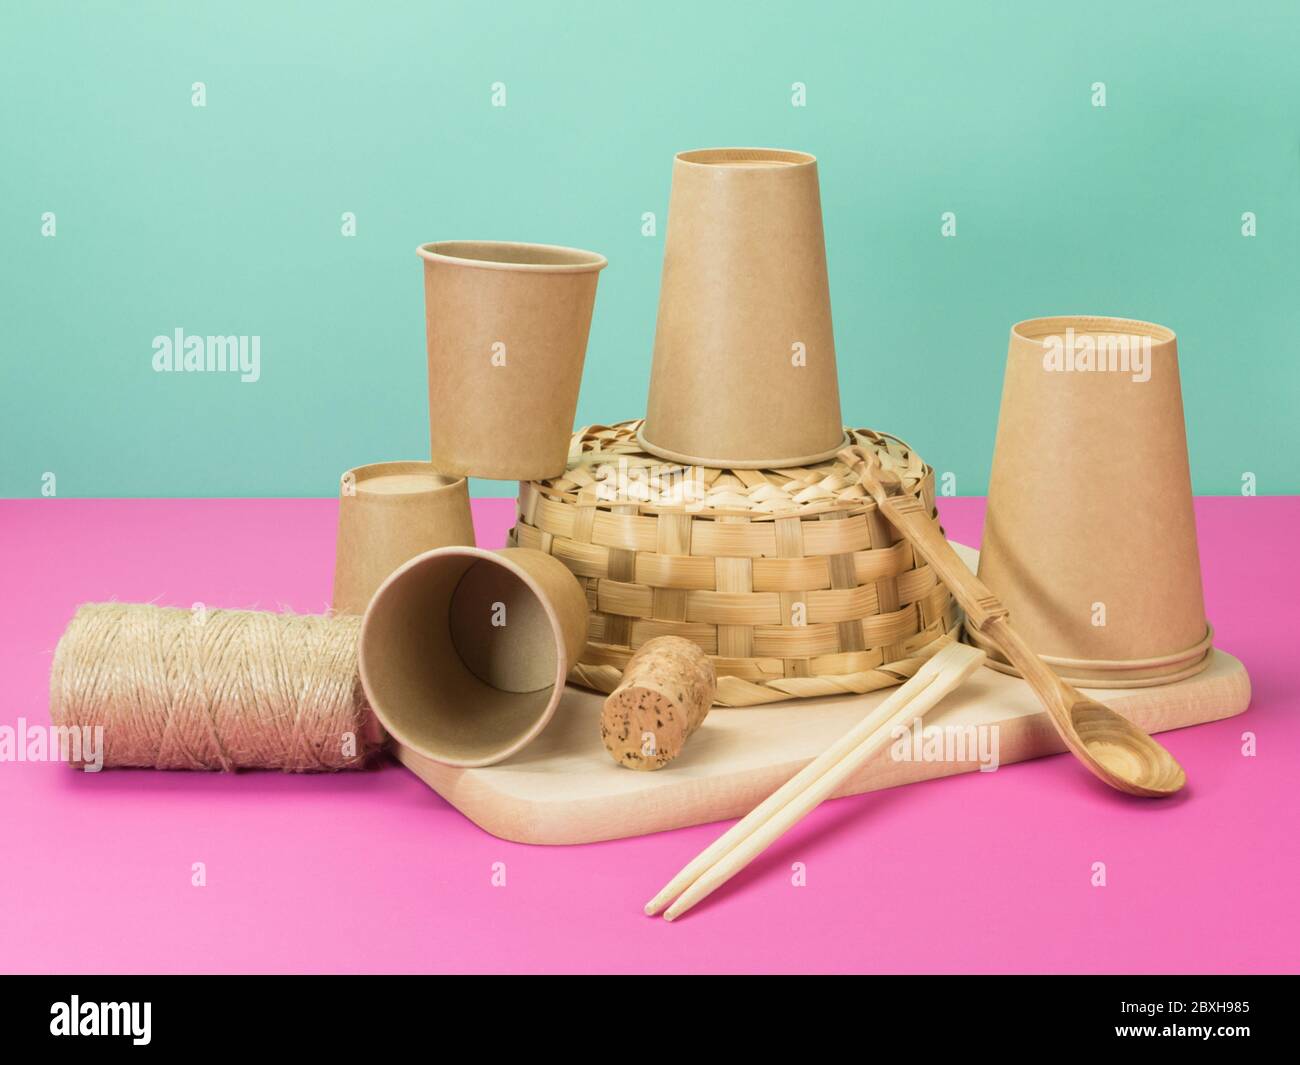 Environmental crockery and other household items from natural materials. Beige pink and turquoise background. Stock Photo